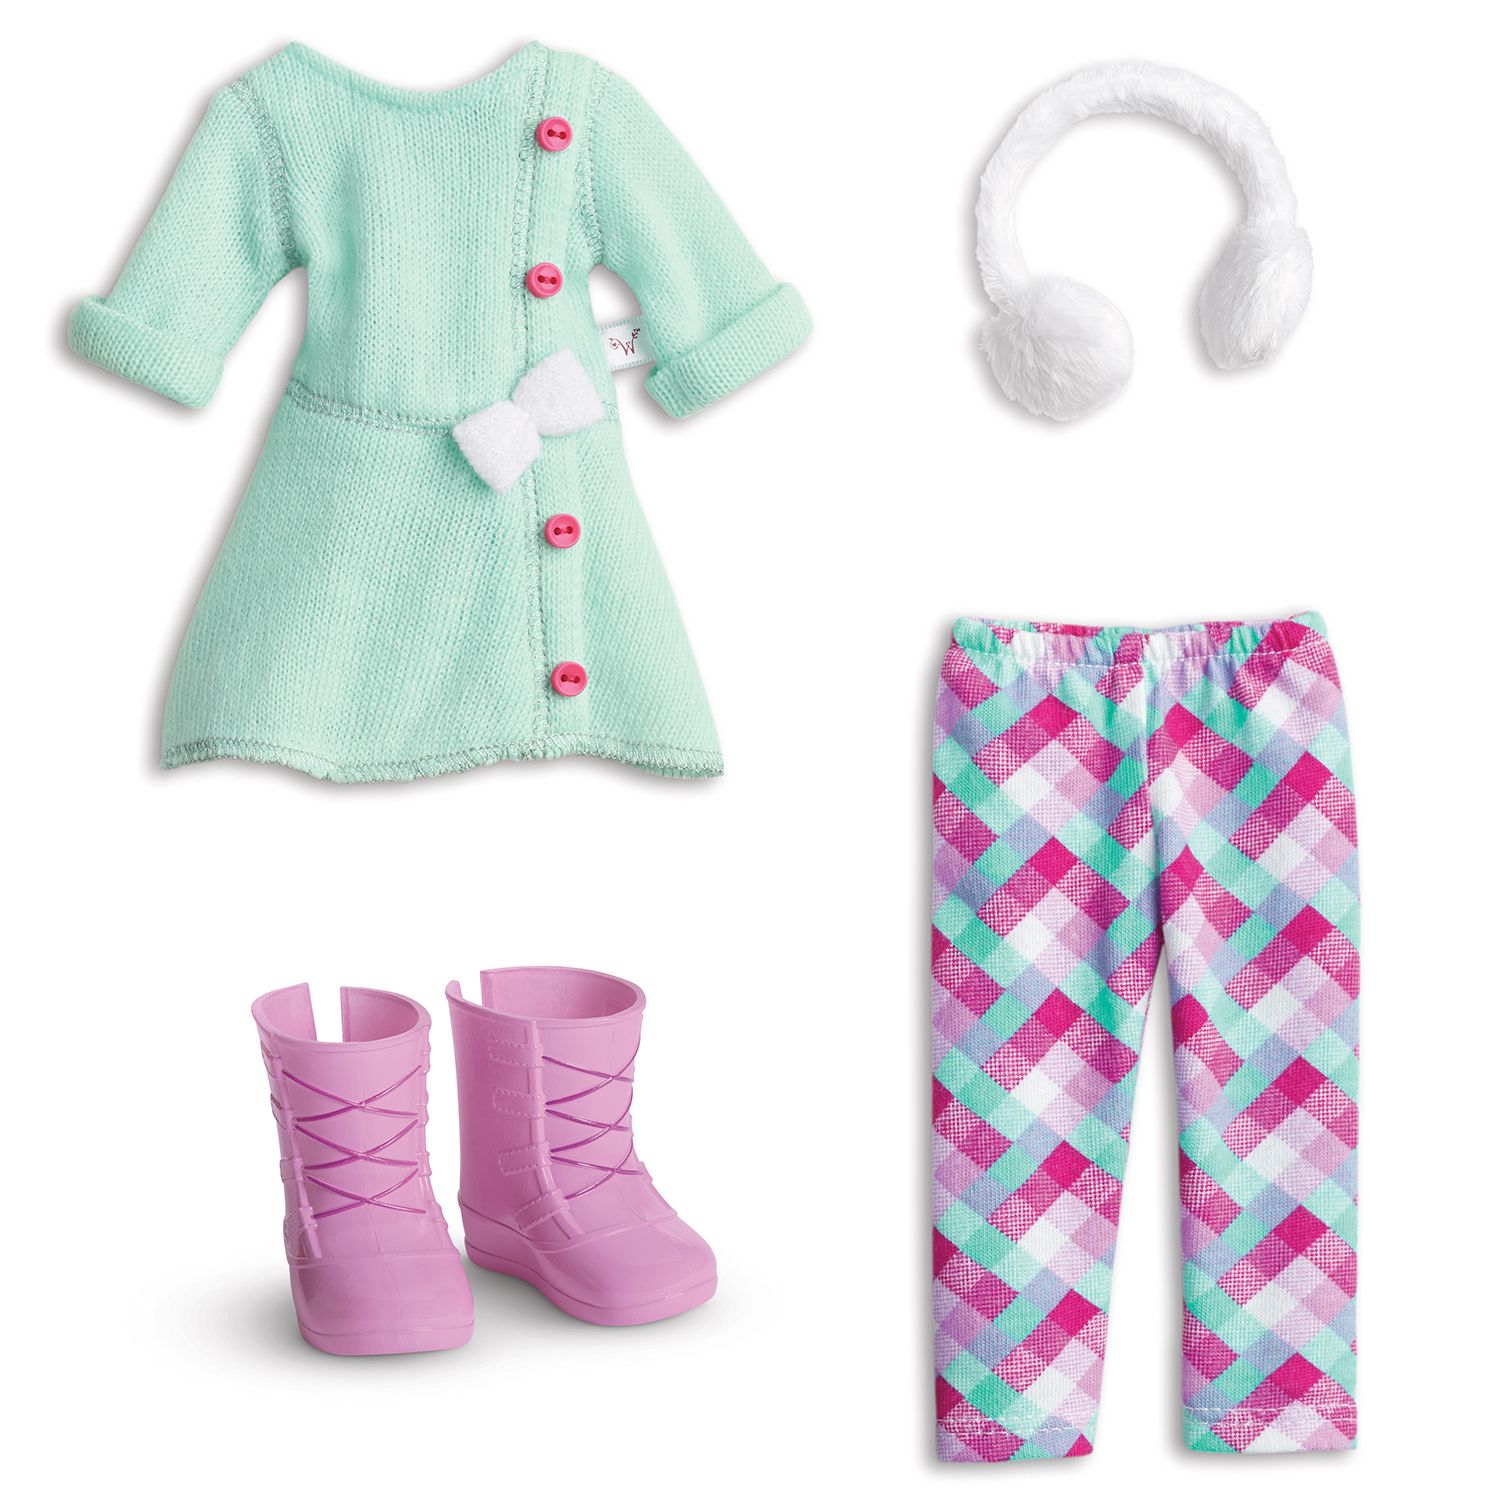 kohls baby doll accessories